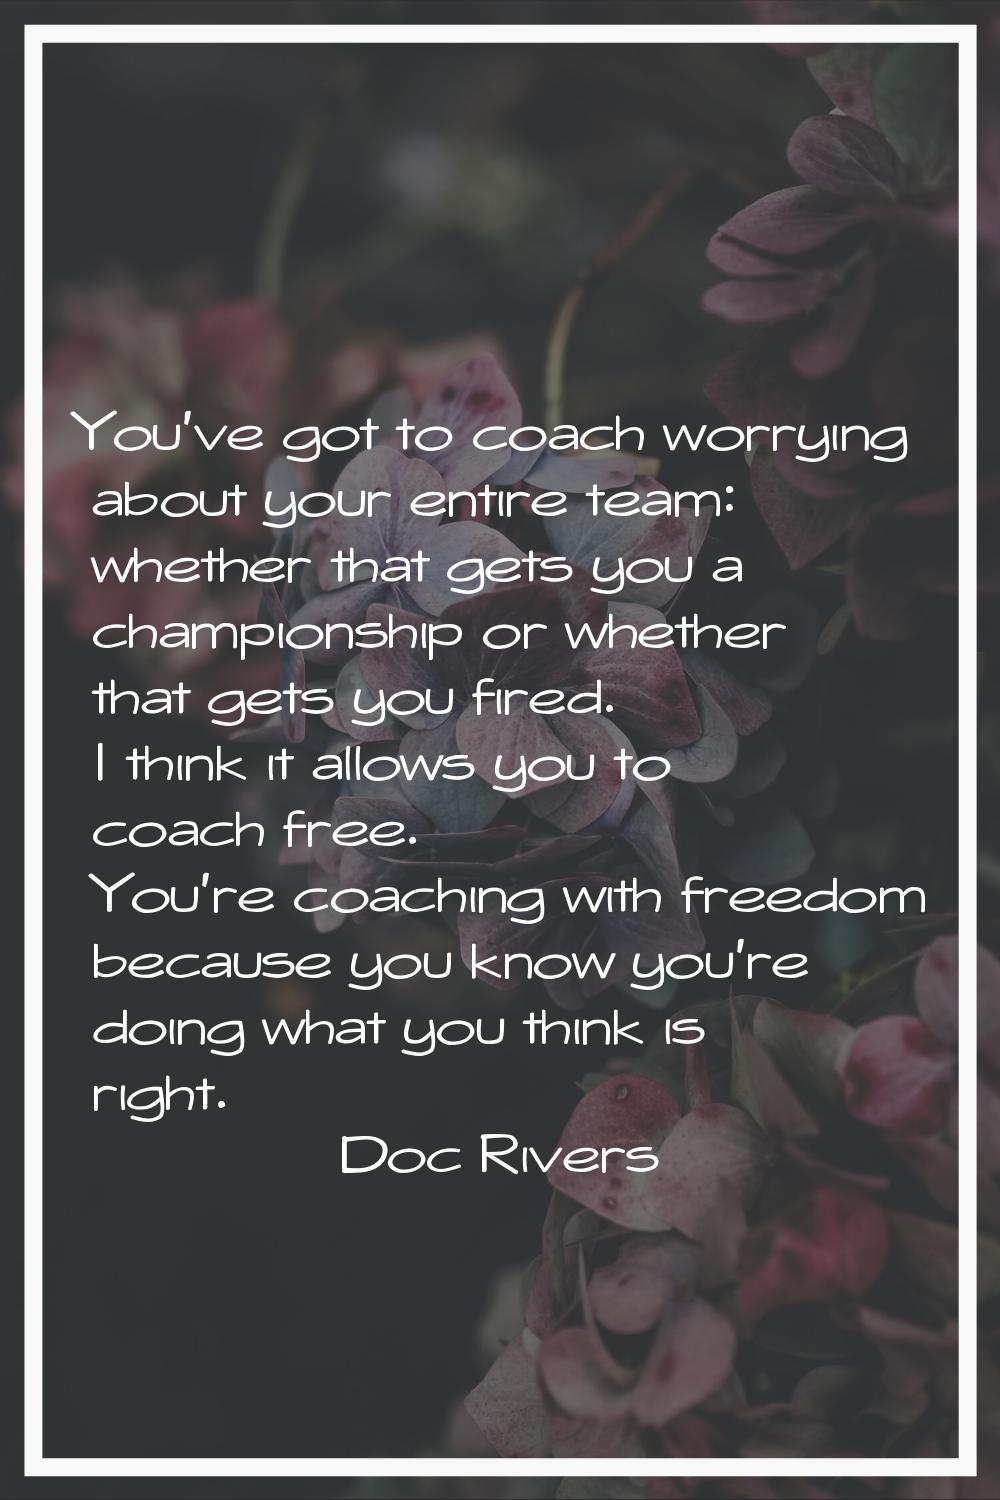 You've got to coach worrying about your entire team: whether that gets you a championship or whethe